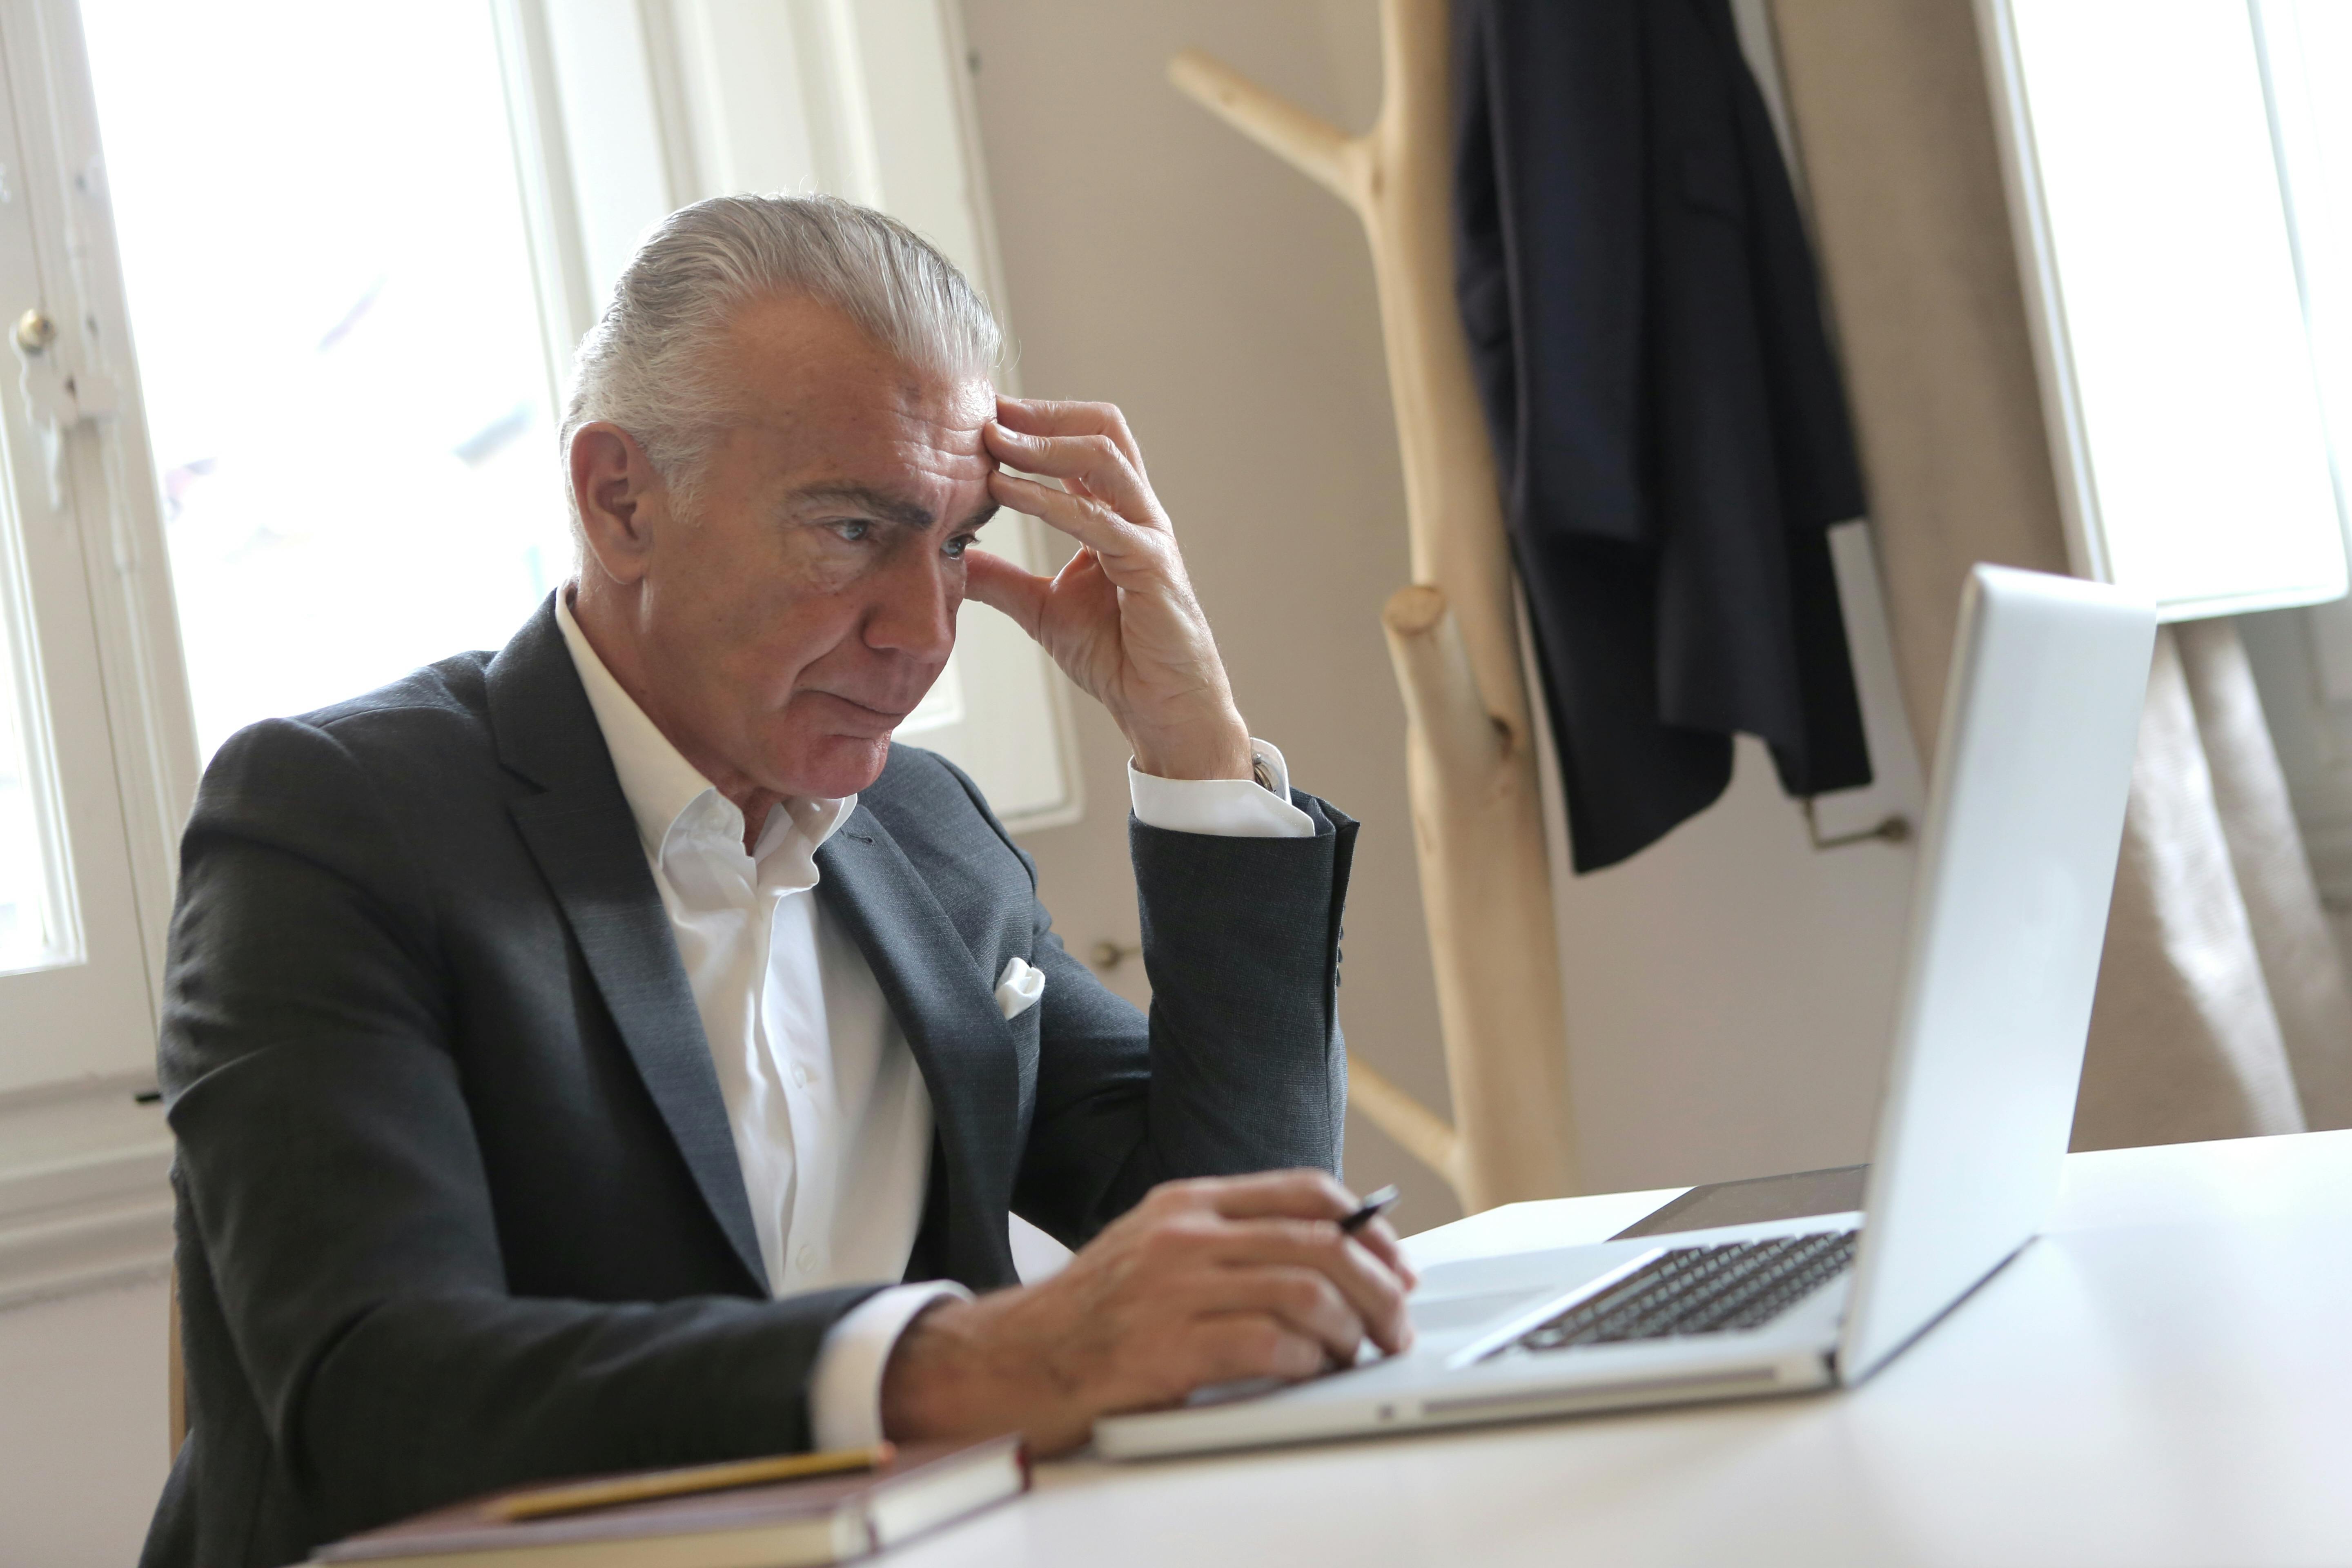 Man in black suit jacket while using a laptop. | Photo: Pexels